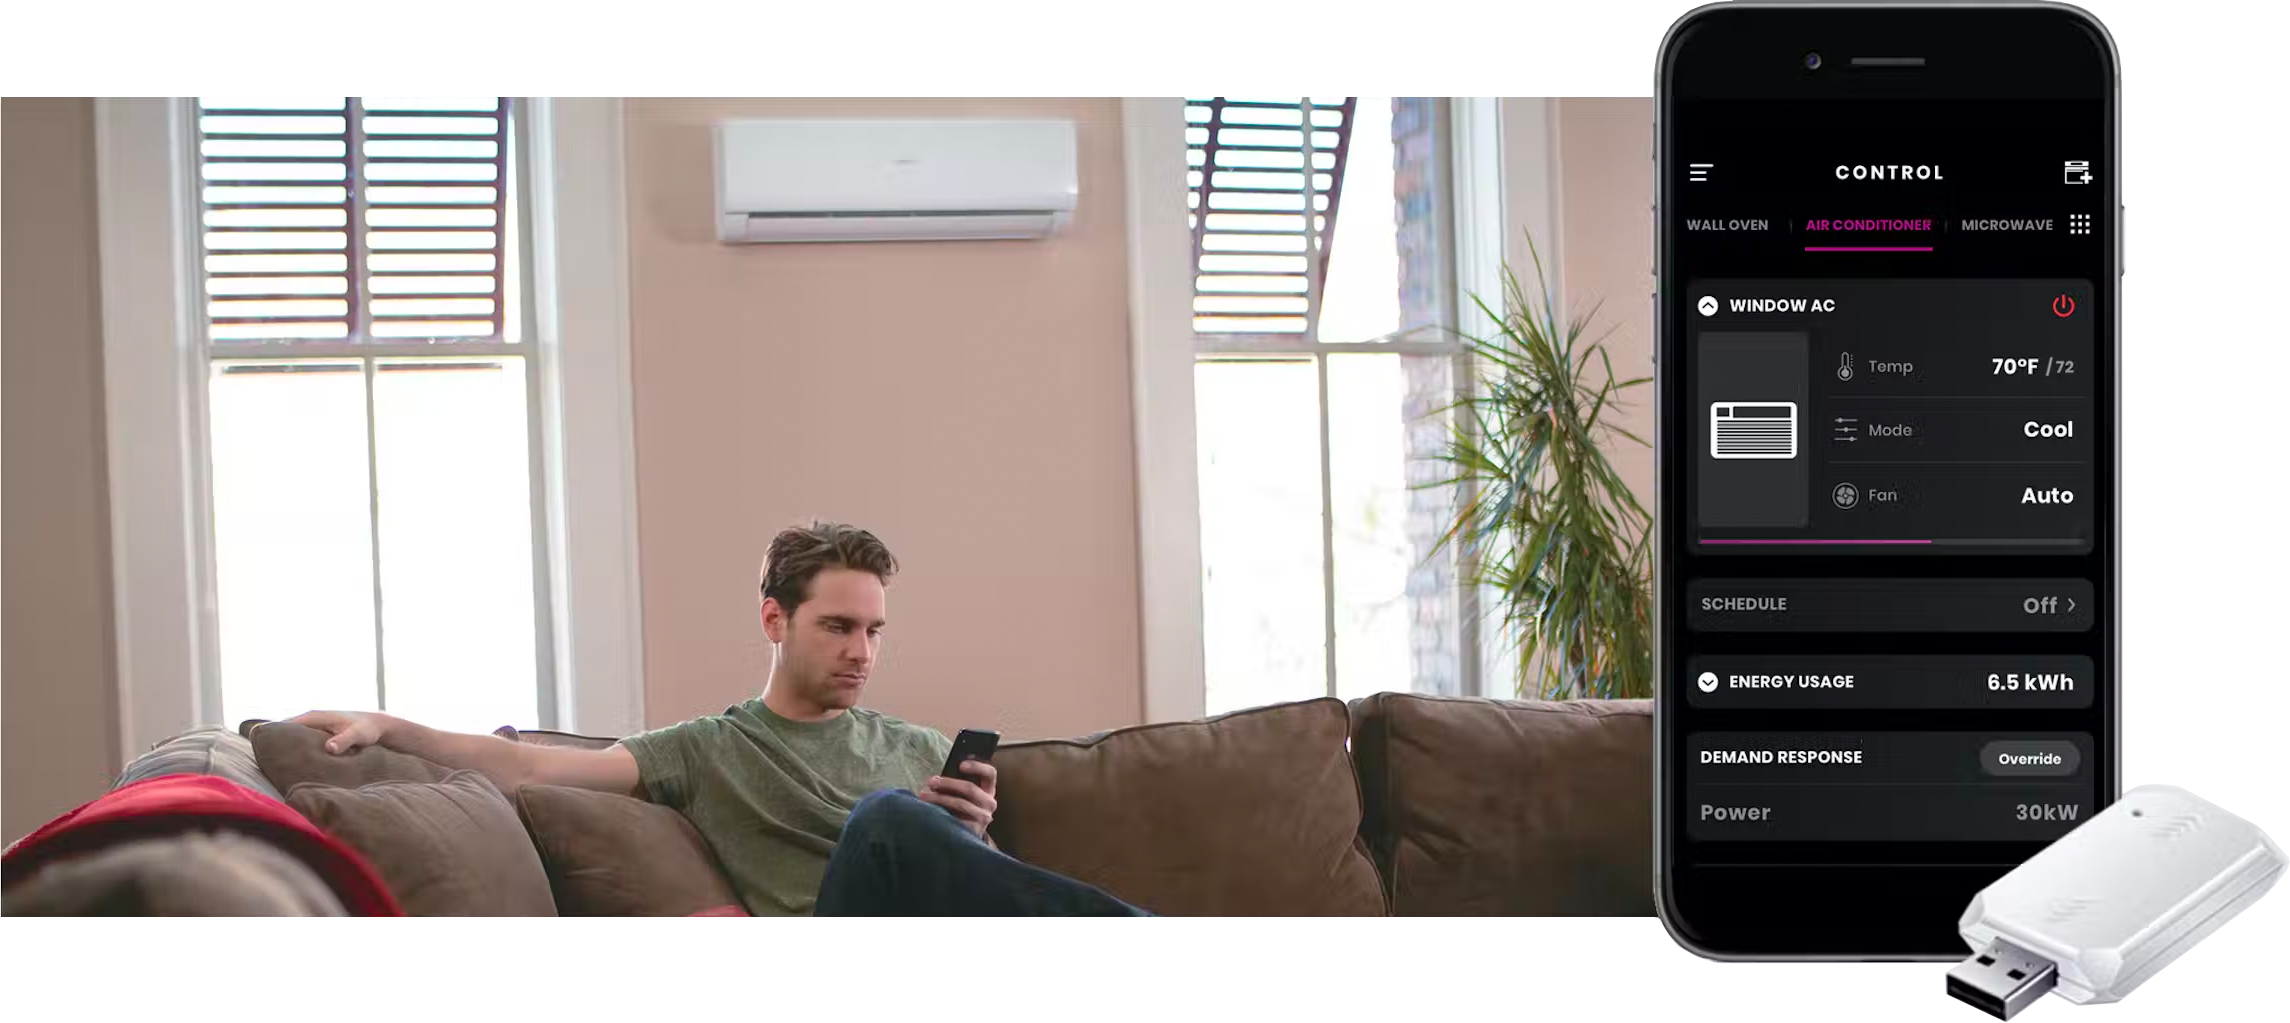 Man sitting in living room with ductless air system installed, and smartphone showing Smart HQ app